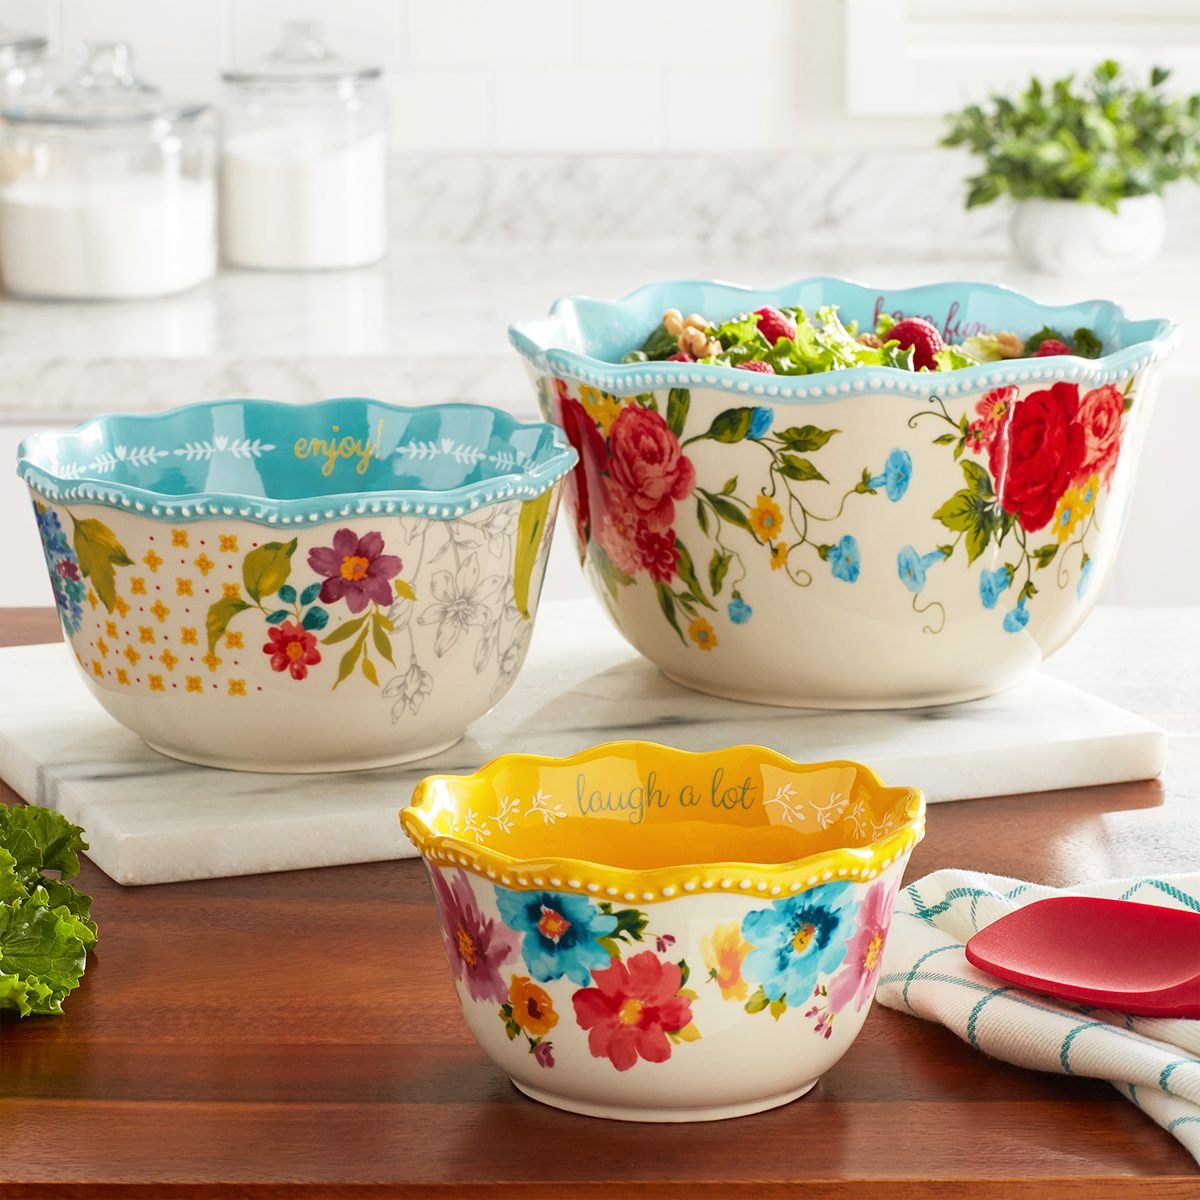 Pioneer Woman's new kitchen line is decorative and affordable